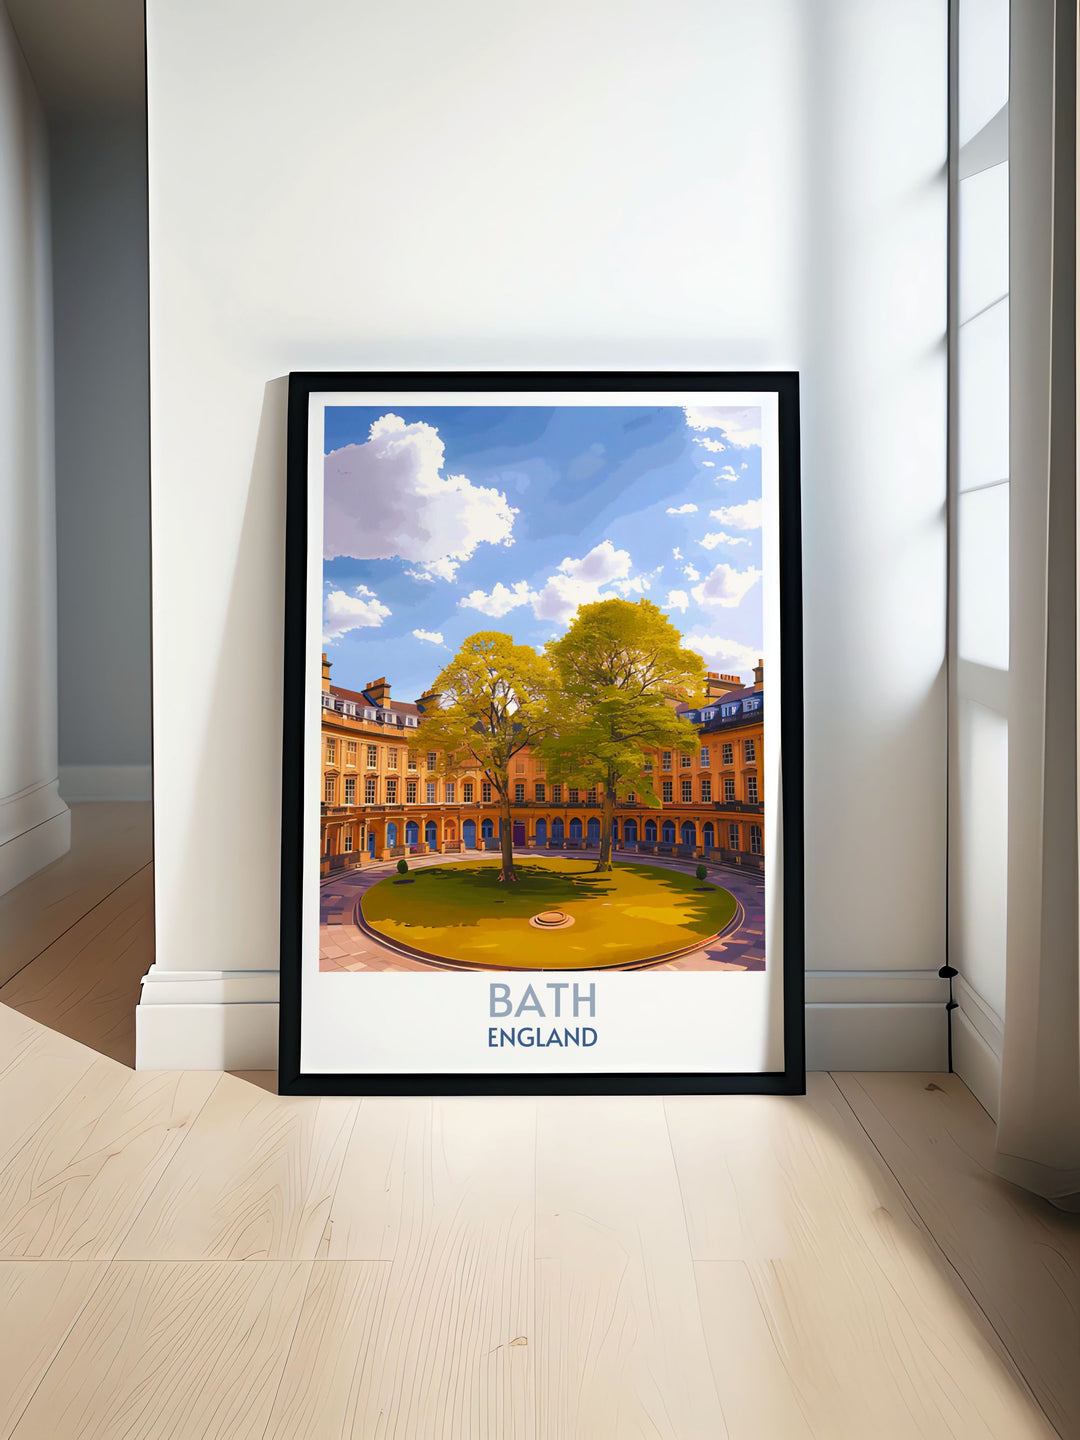 Vibrant art print of The Circus in Bath capturing the Georgian architecture perfect for enhancing any living space or office.